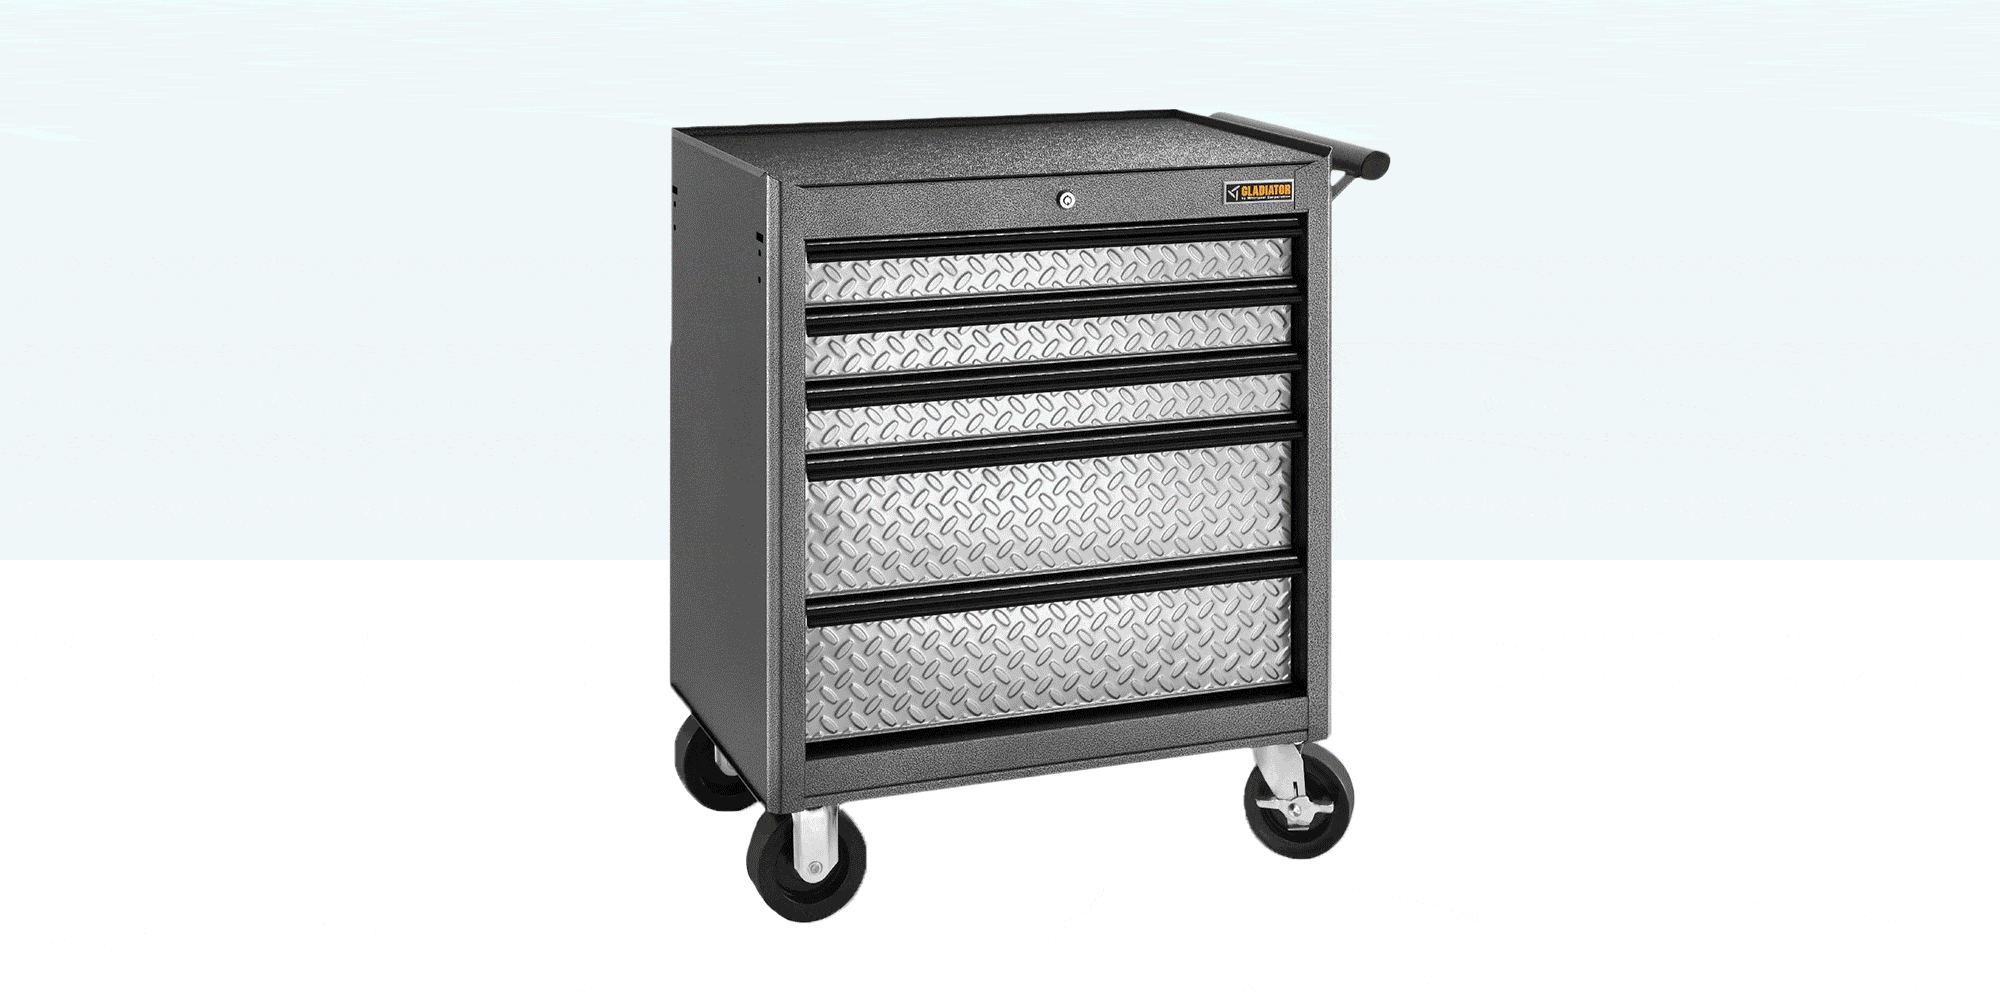 16 Best Rolling Tool Boxes in 2018 - Portable Metal Tool Boxes and Chests